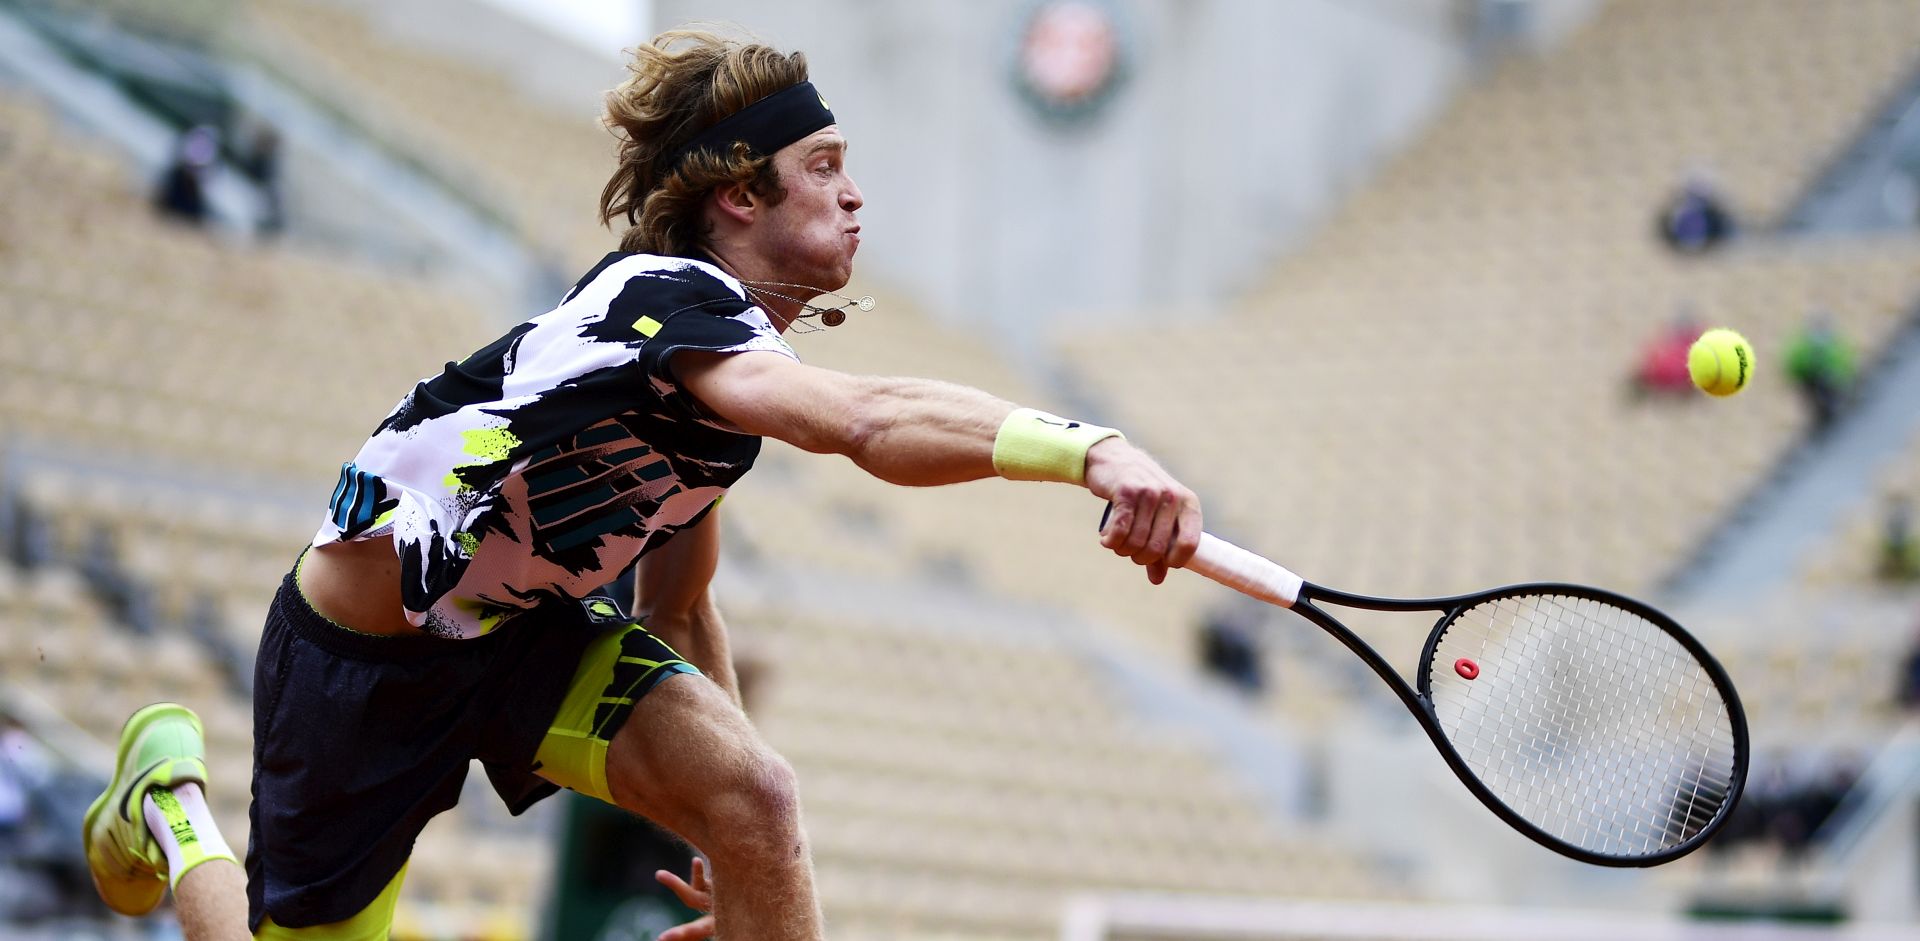 epa08721808 Andrey Rublev of Russia hits a forehand during his 4th round match against  Marton Fucsovics of Hungary during the French Open tennis tournament at Roland Garros in Paris, France, 05 October 2020.  EPA/JULIEN DE ROSA